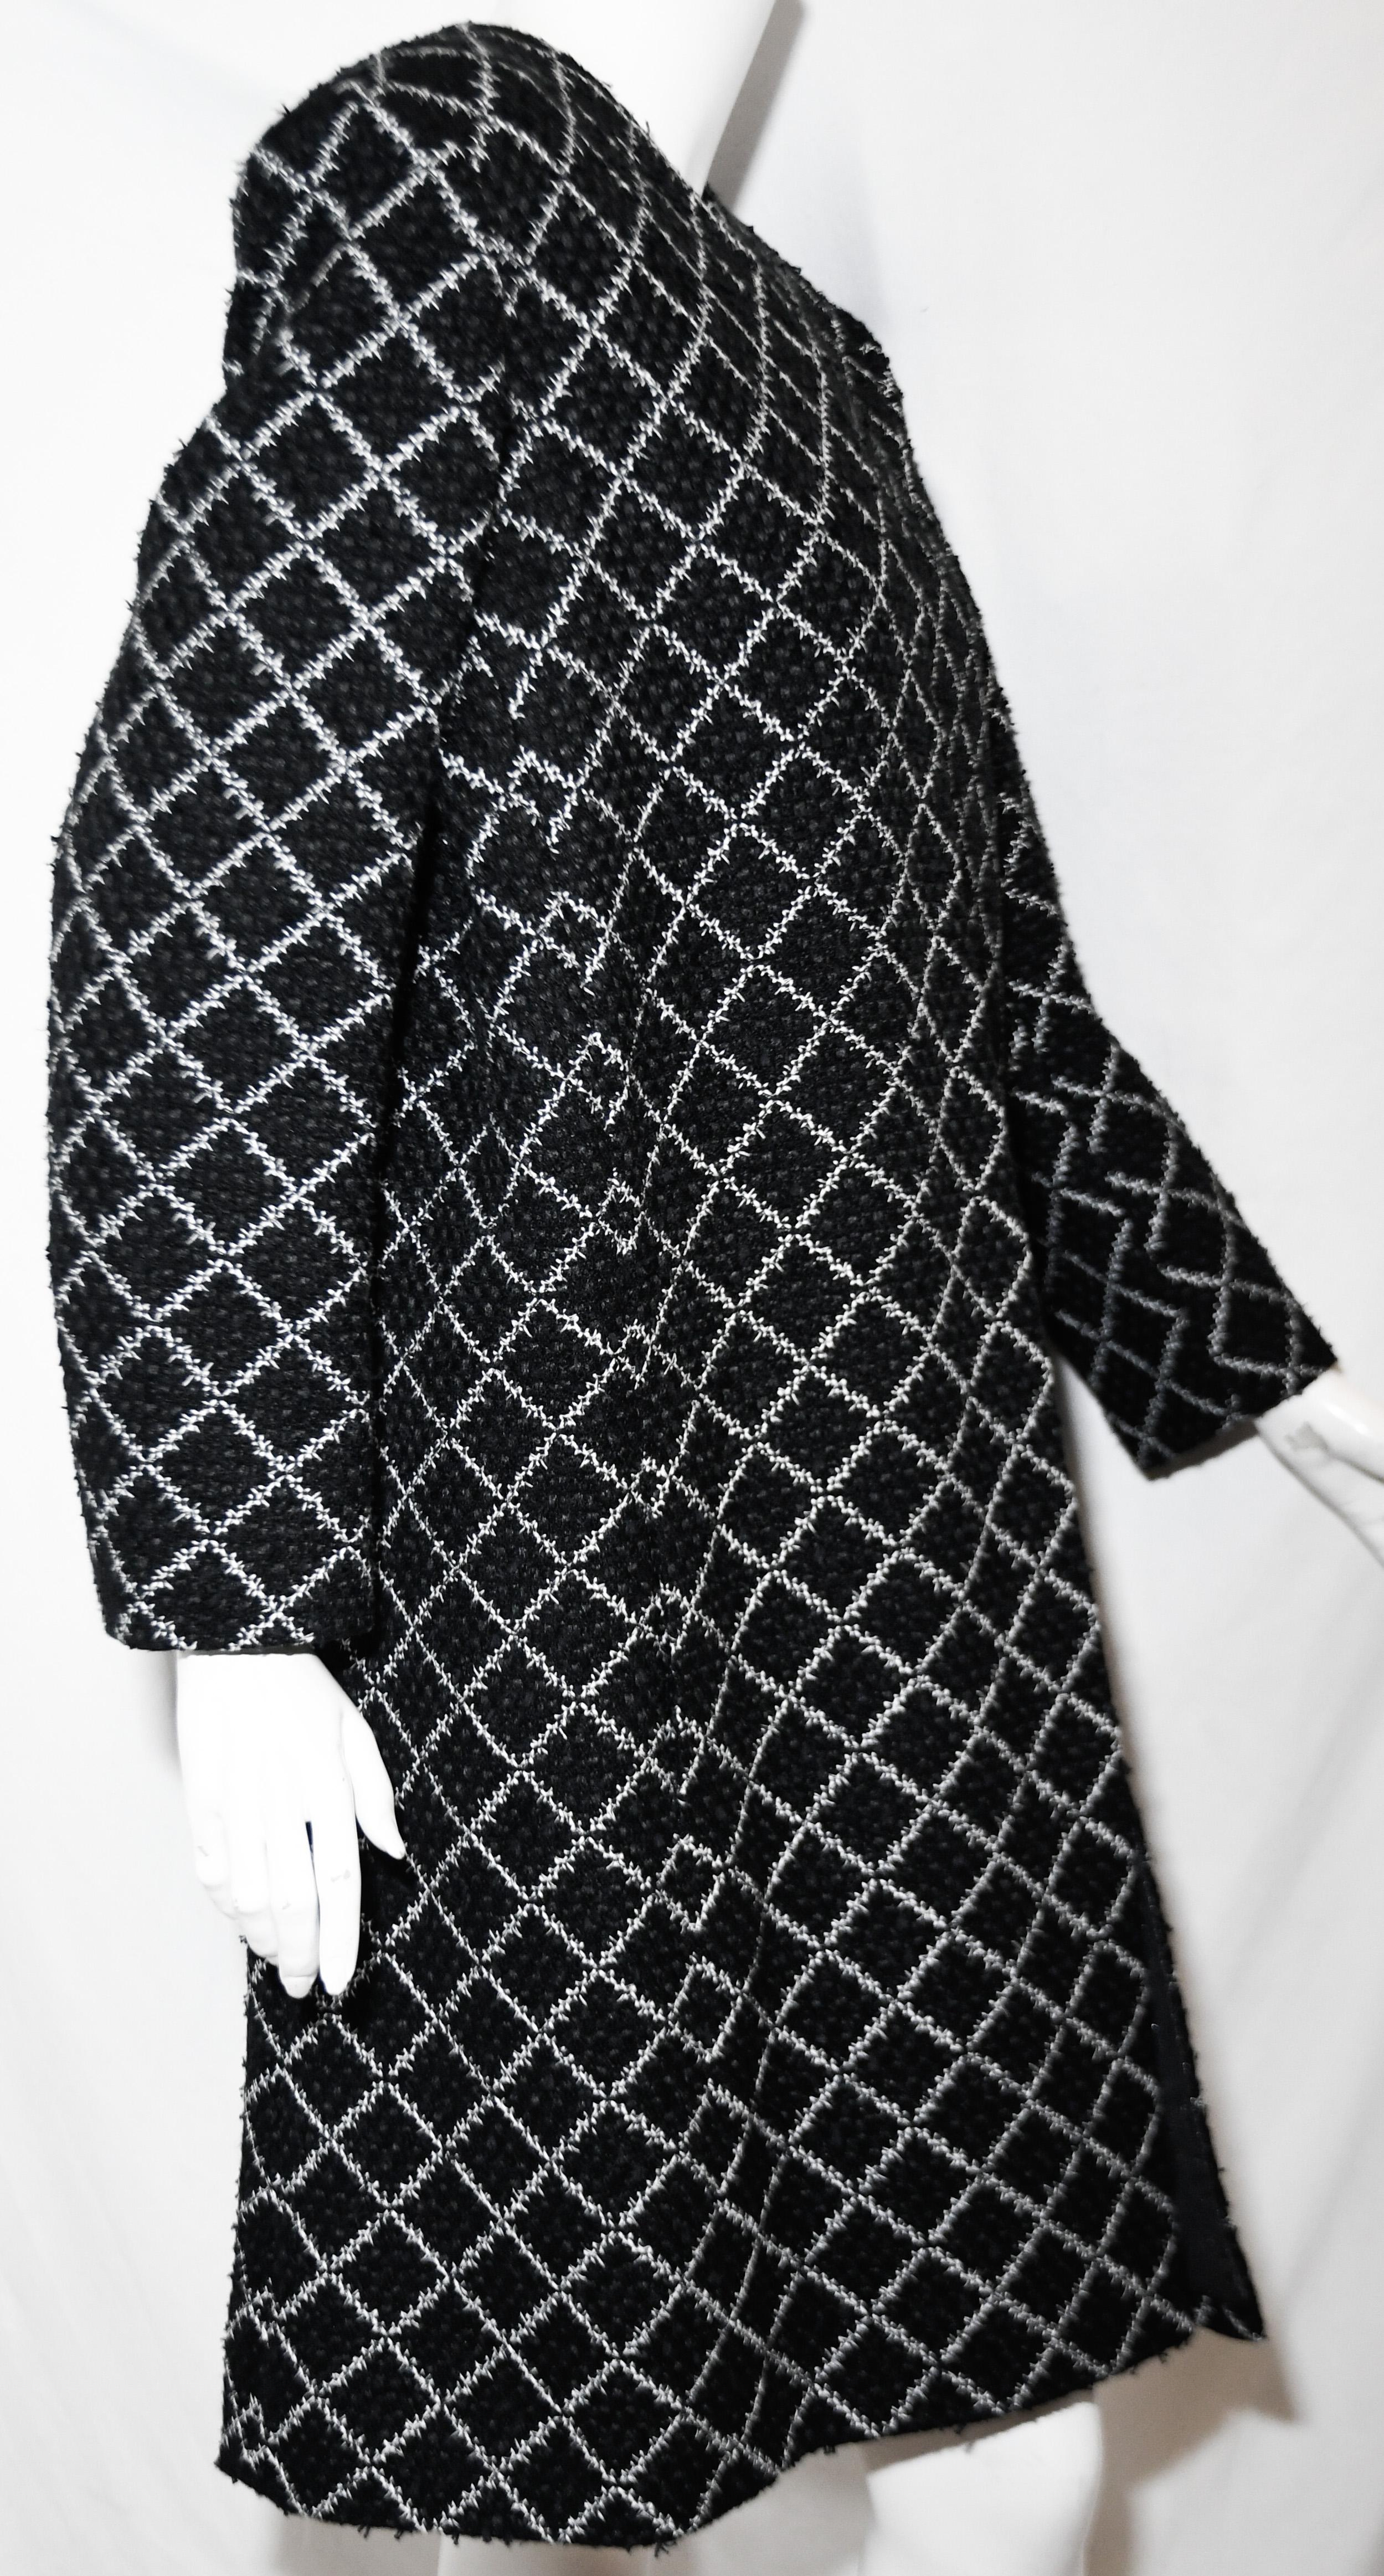 chanel black and white coat